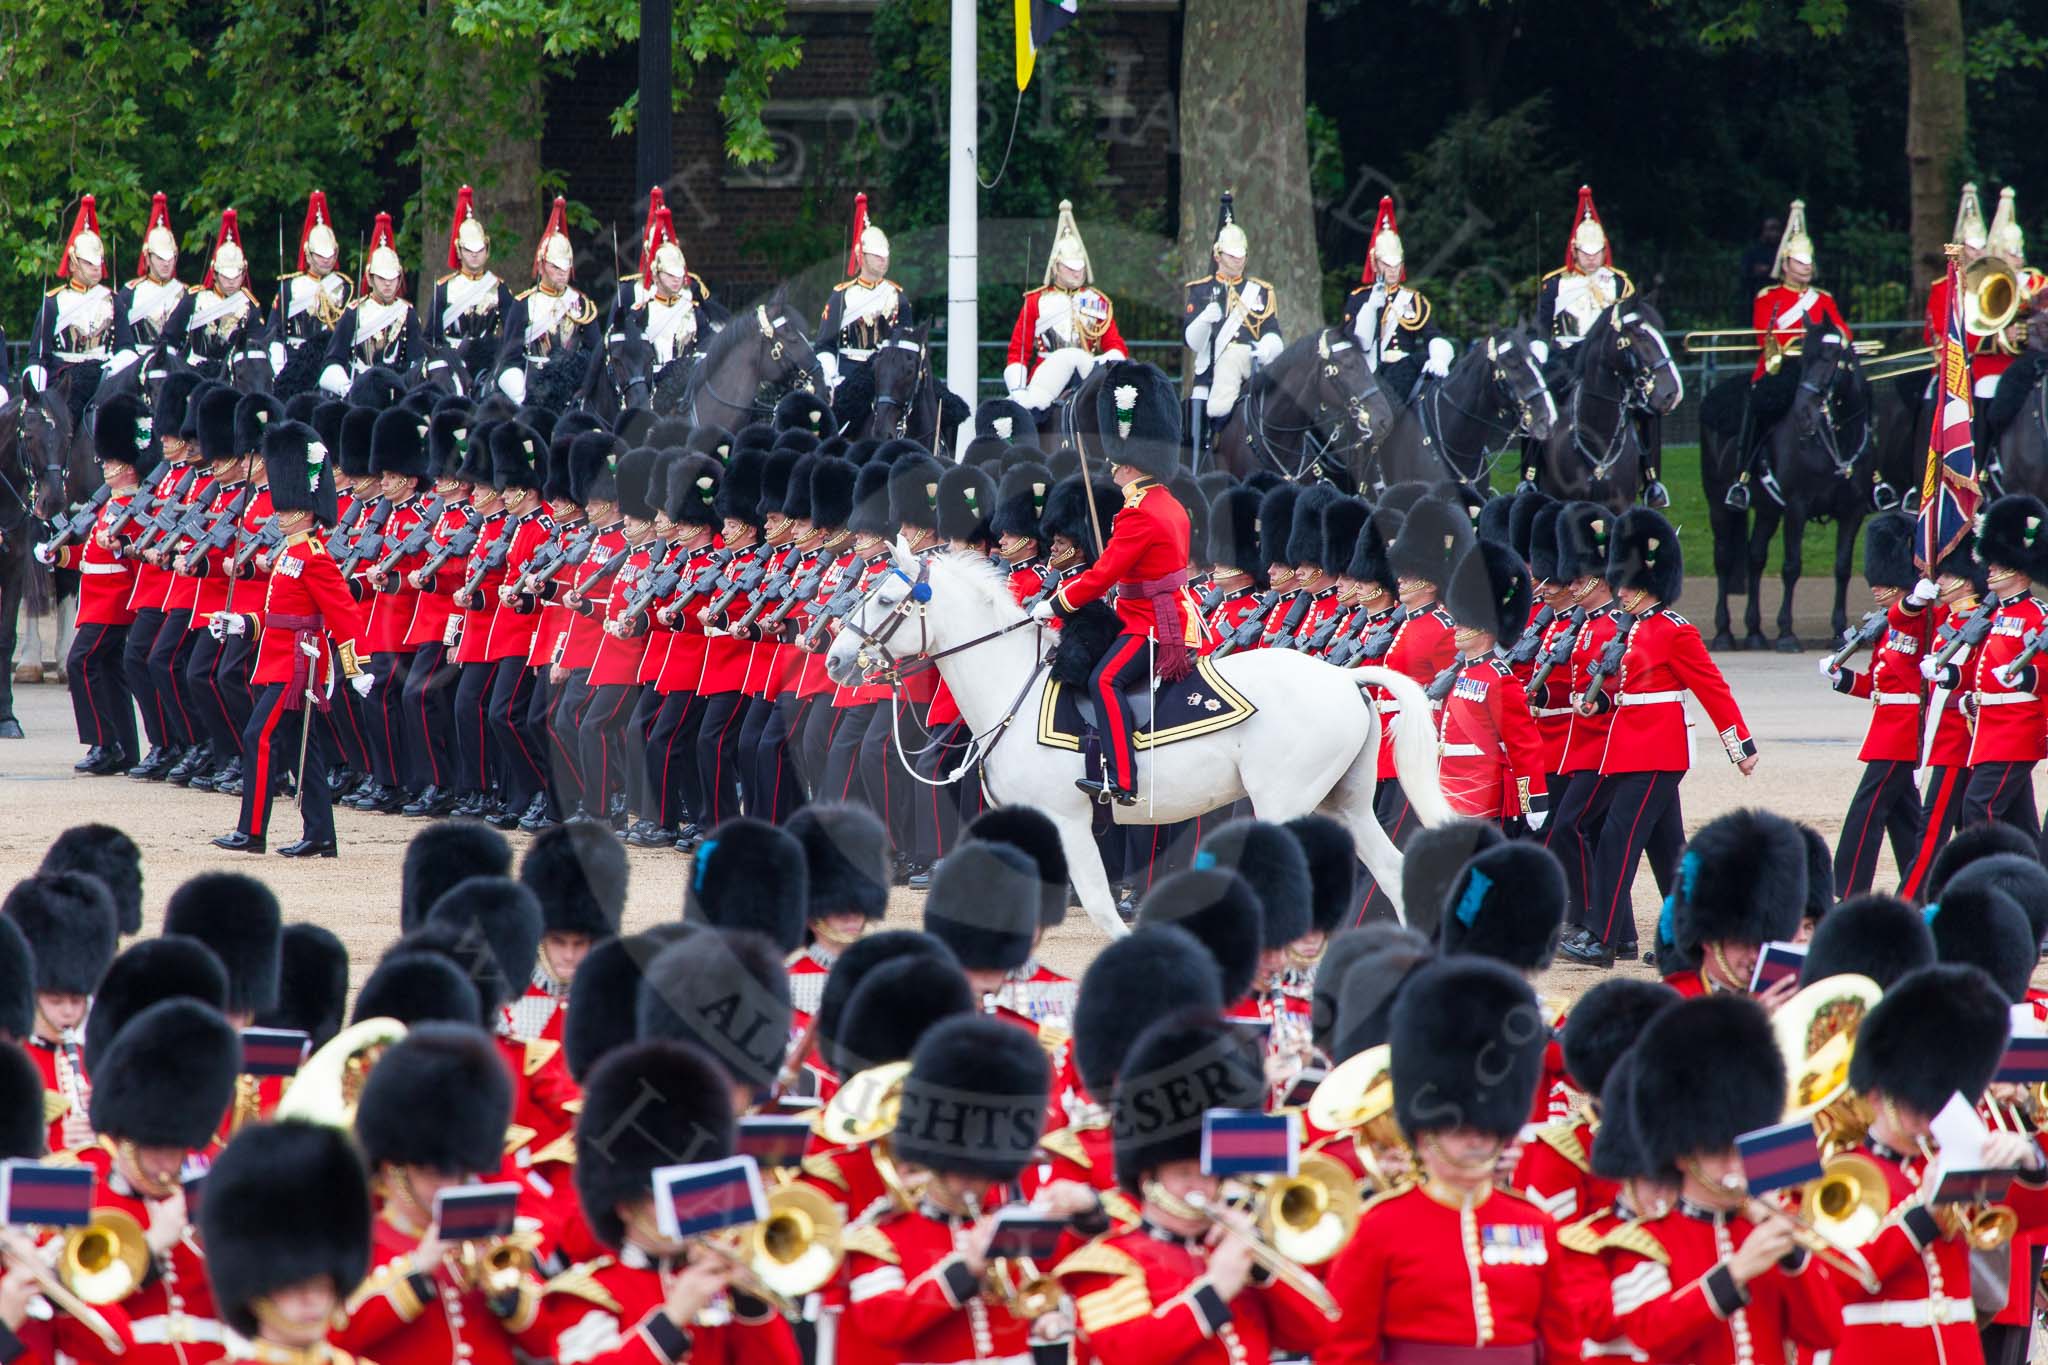 Major General's Review 2013: No. 1 Guard (Escort for the Colour),1st Battalion Welsh Guards, at the beginning of the March Past in Quick Time..
Horse Guards Parade, Westminster,
London SW1,

United Kingdom,
on 01 June 2013 at 11:39, image #522